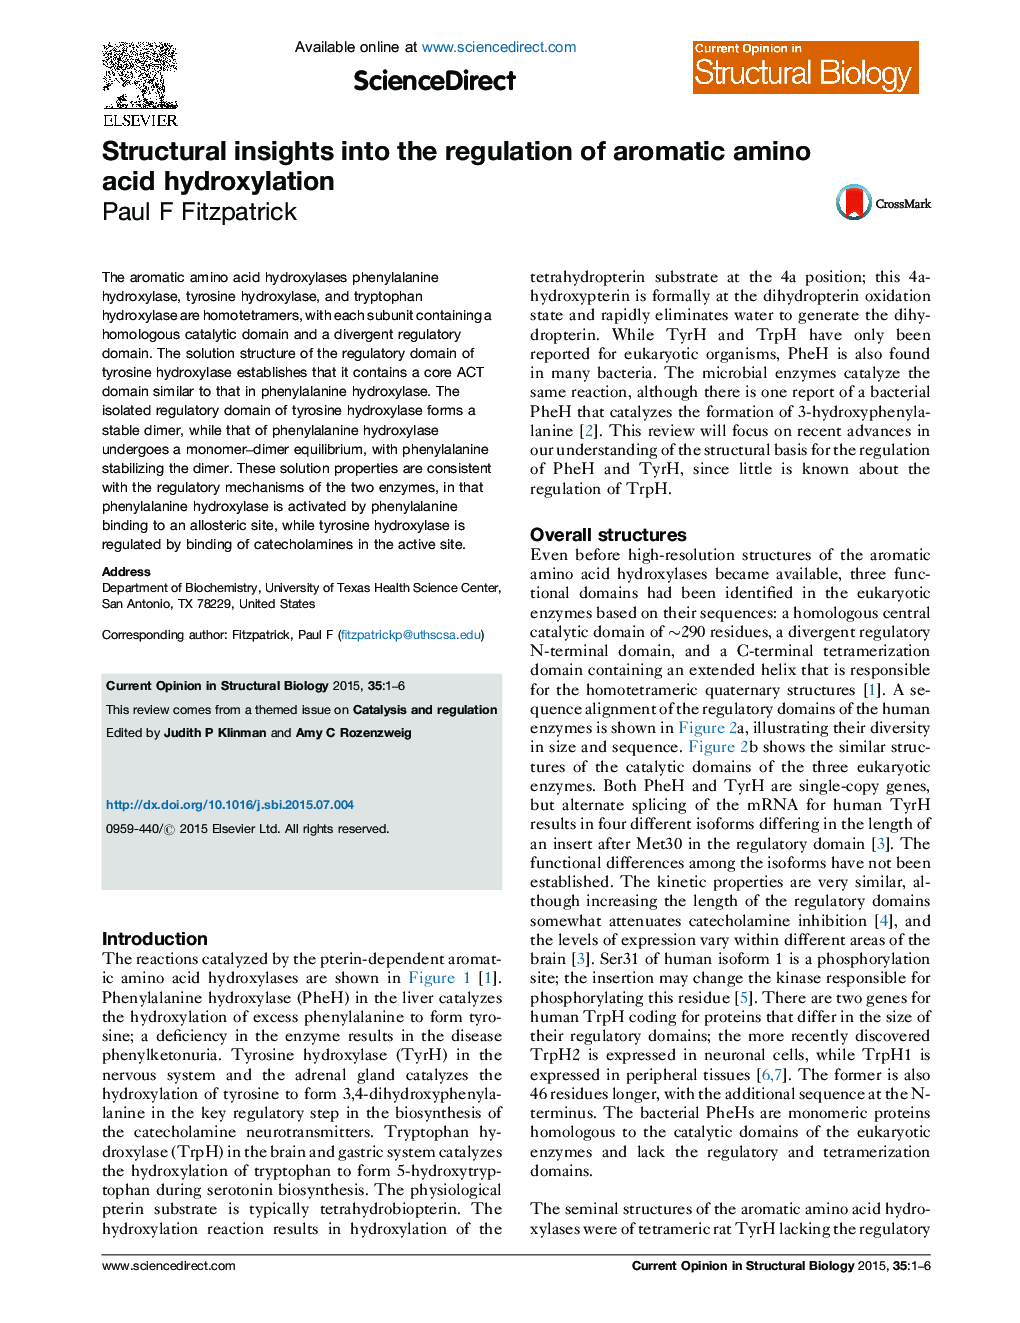 Structural insights into the regulation of aromatic amino acid hydroxylation